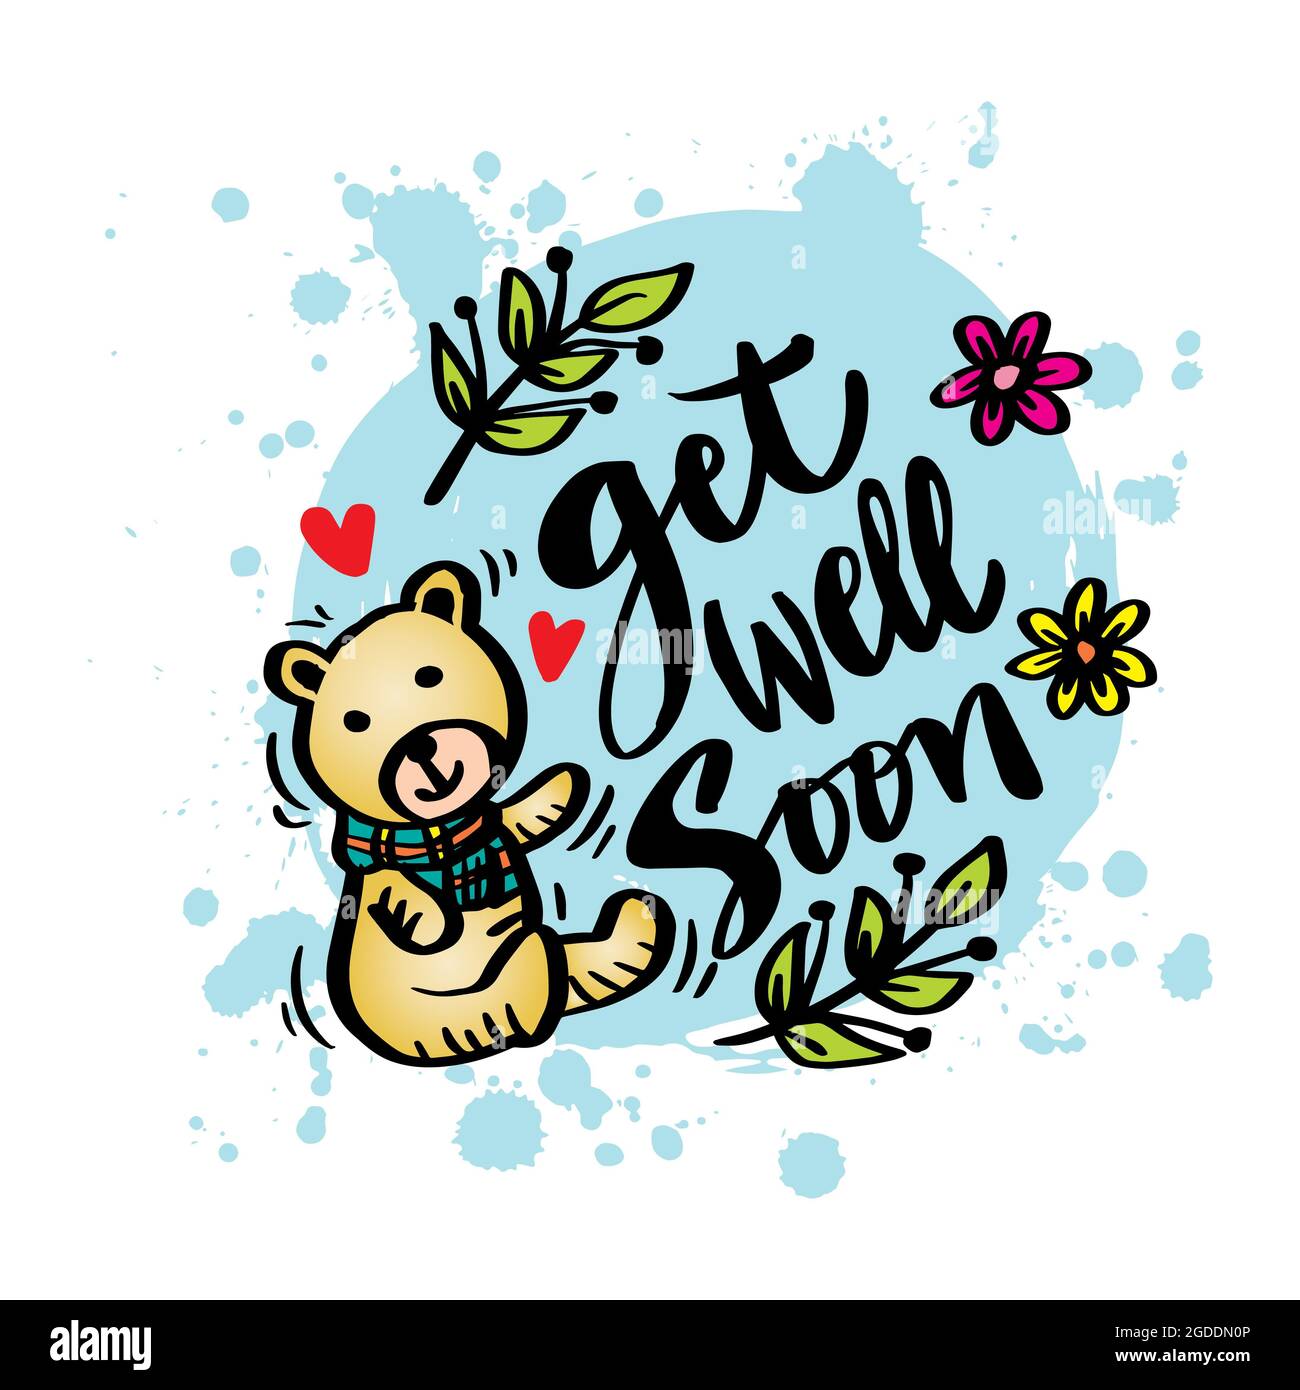 Get Well Soon Teddy Bear With Flowers Stock Photo - Download Image Now - Get  Well Card, Get Well Soon - Short Phrase, Recovery - iStock